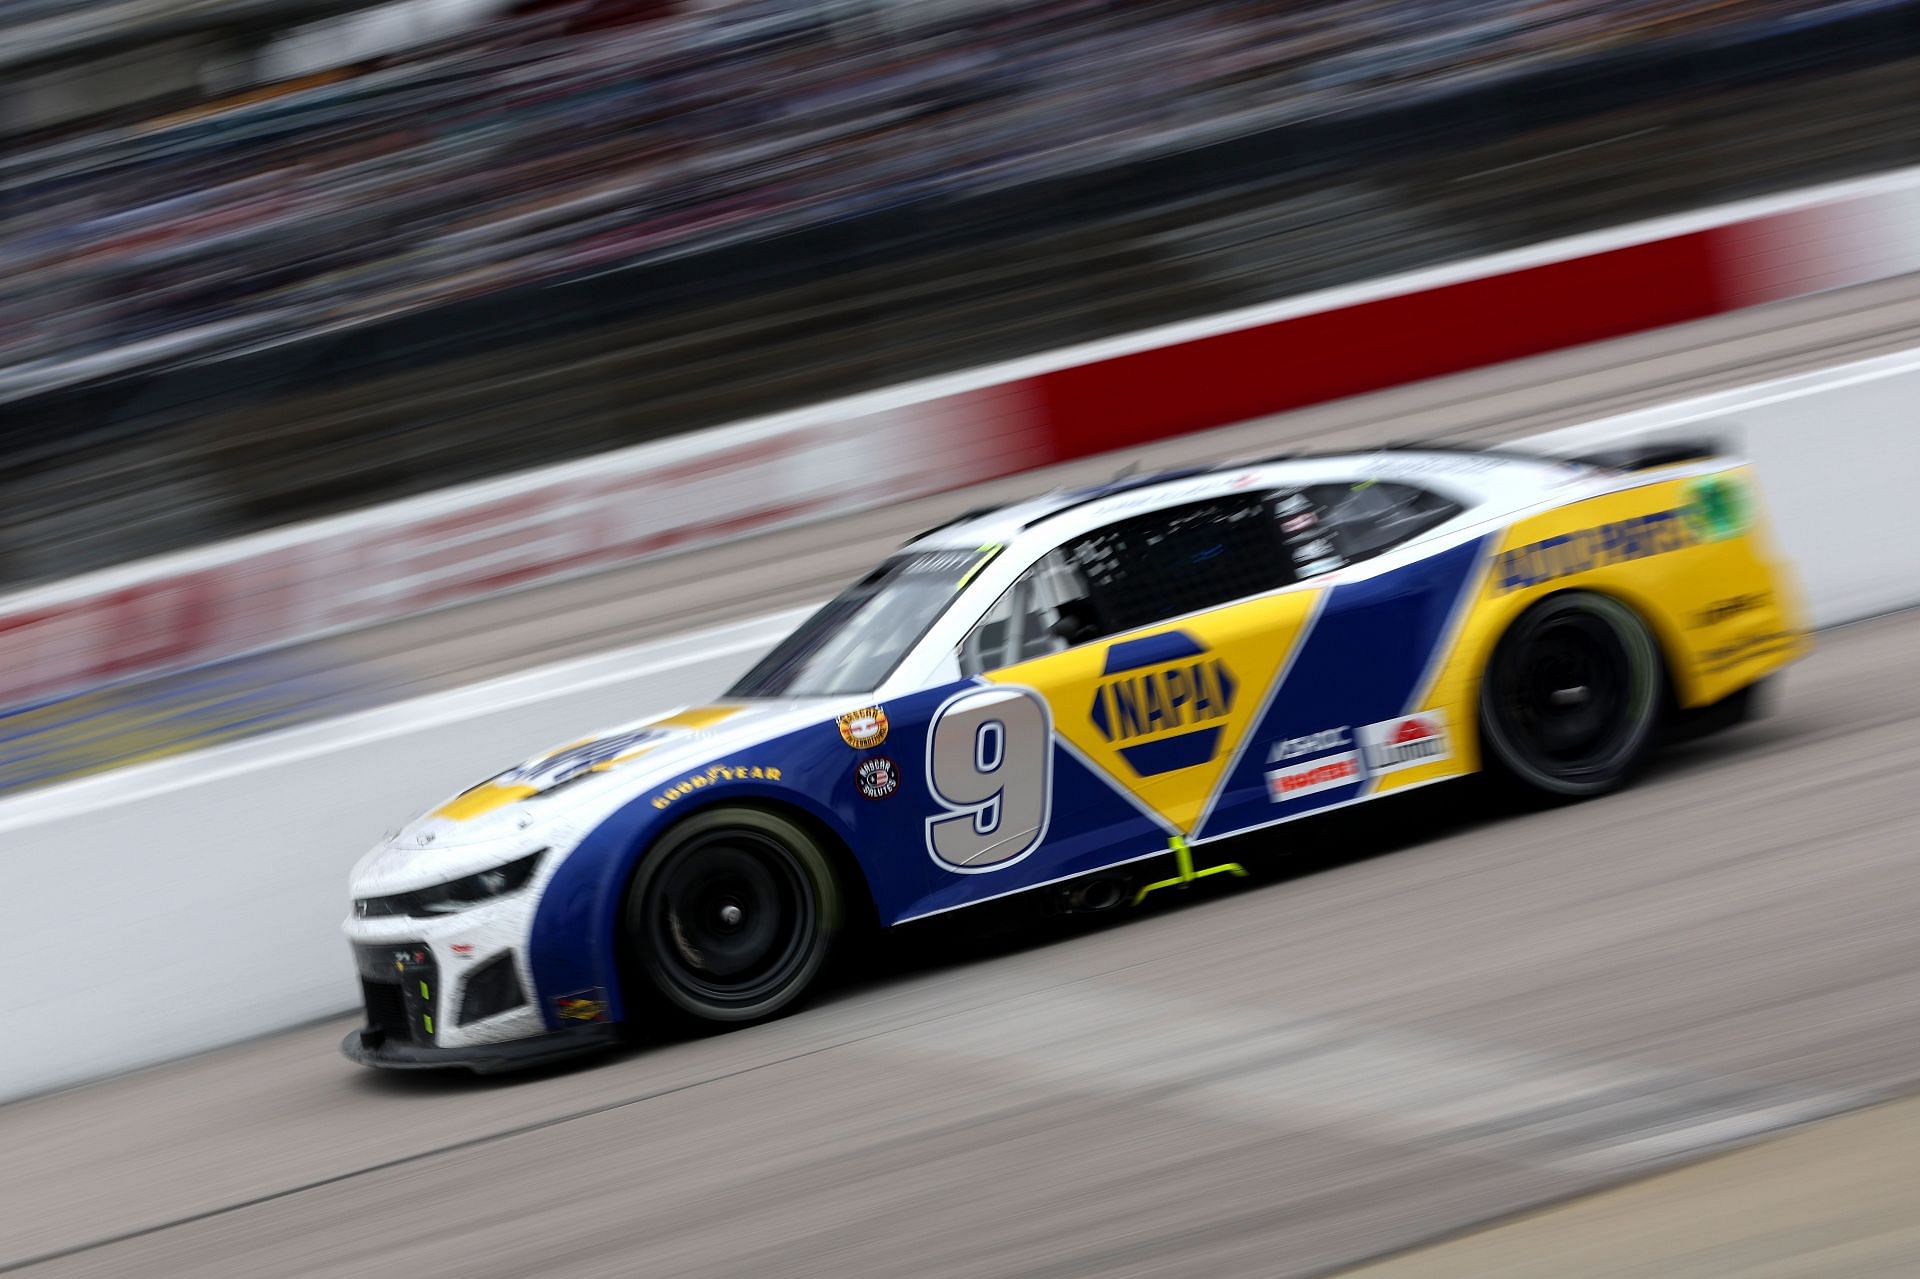 Chase Elliott drives during the 2022 NASCAR Cup Series Goodyear 400 at Darlington Raceway in Darlington, South Carolina. (Photo by James Gilbert/Getty Images)